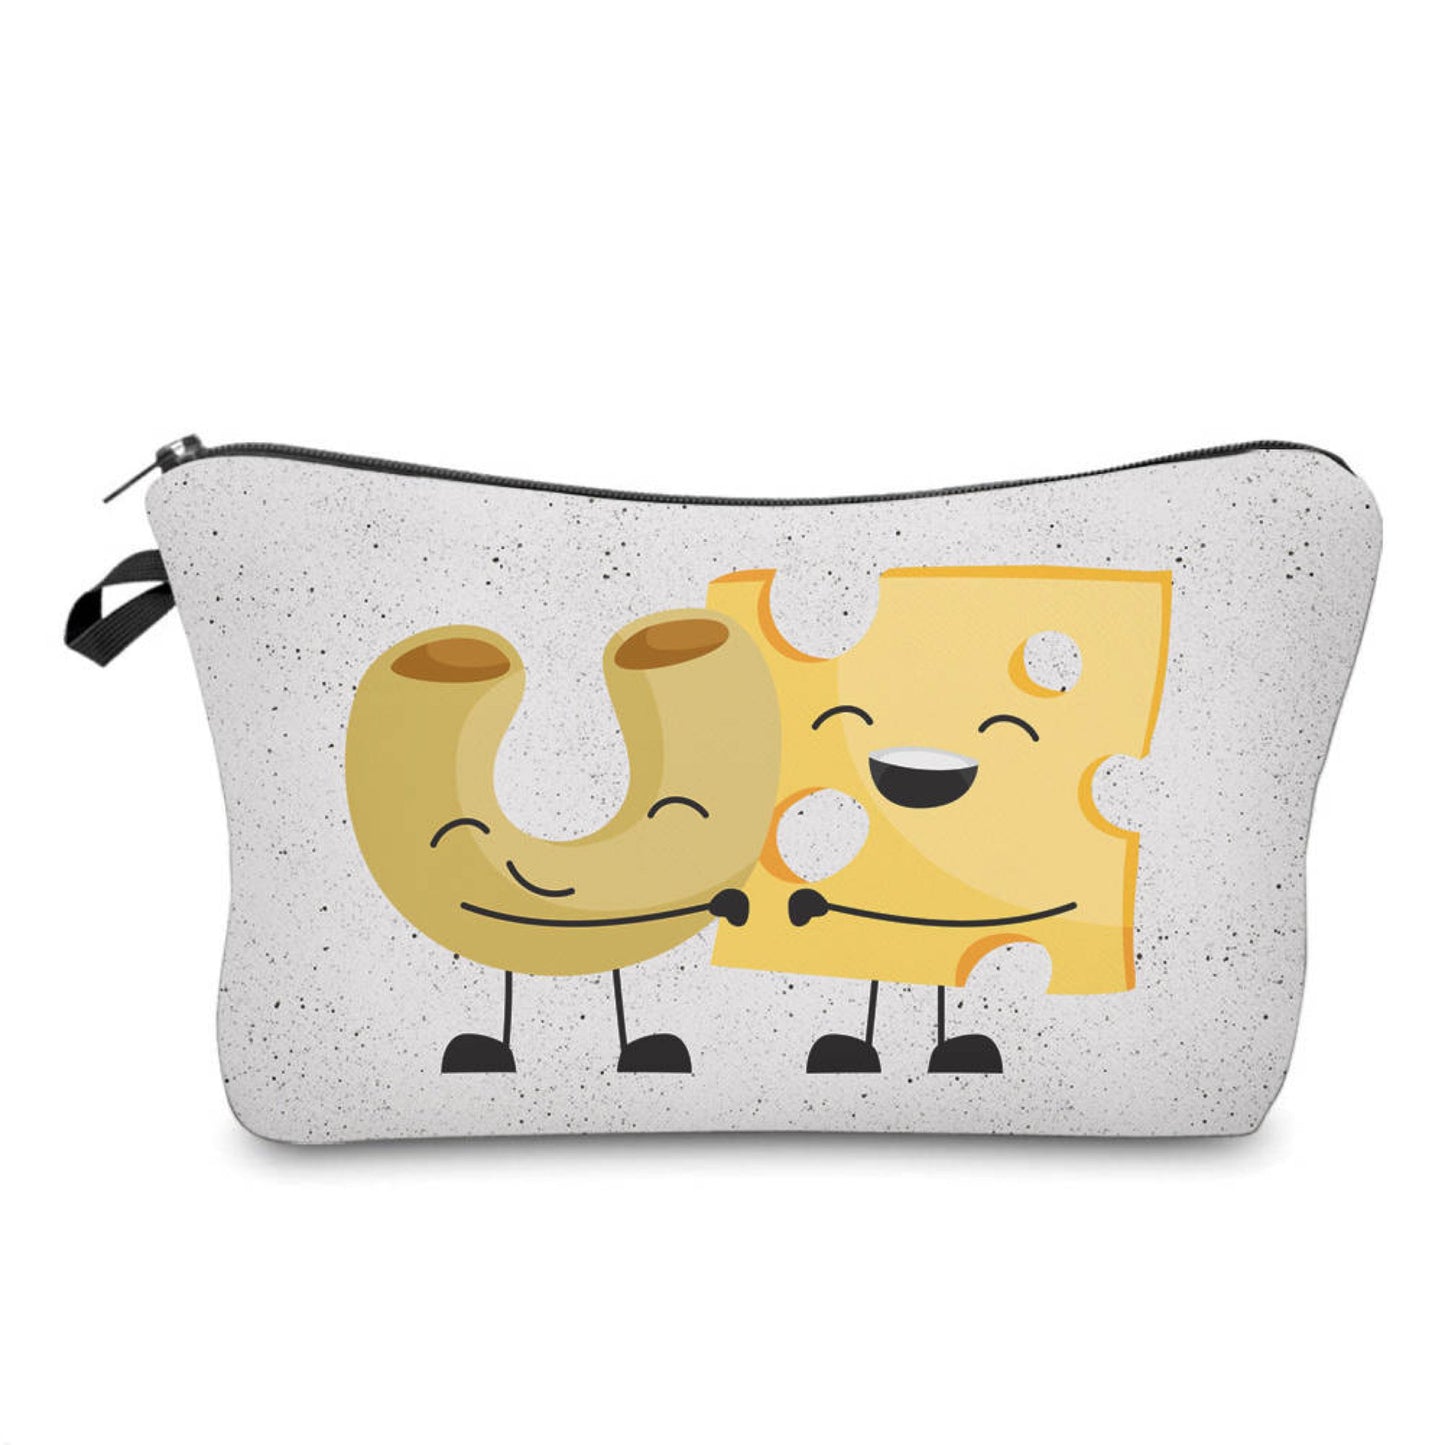 Pouch - Food, Mac & Cheese